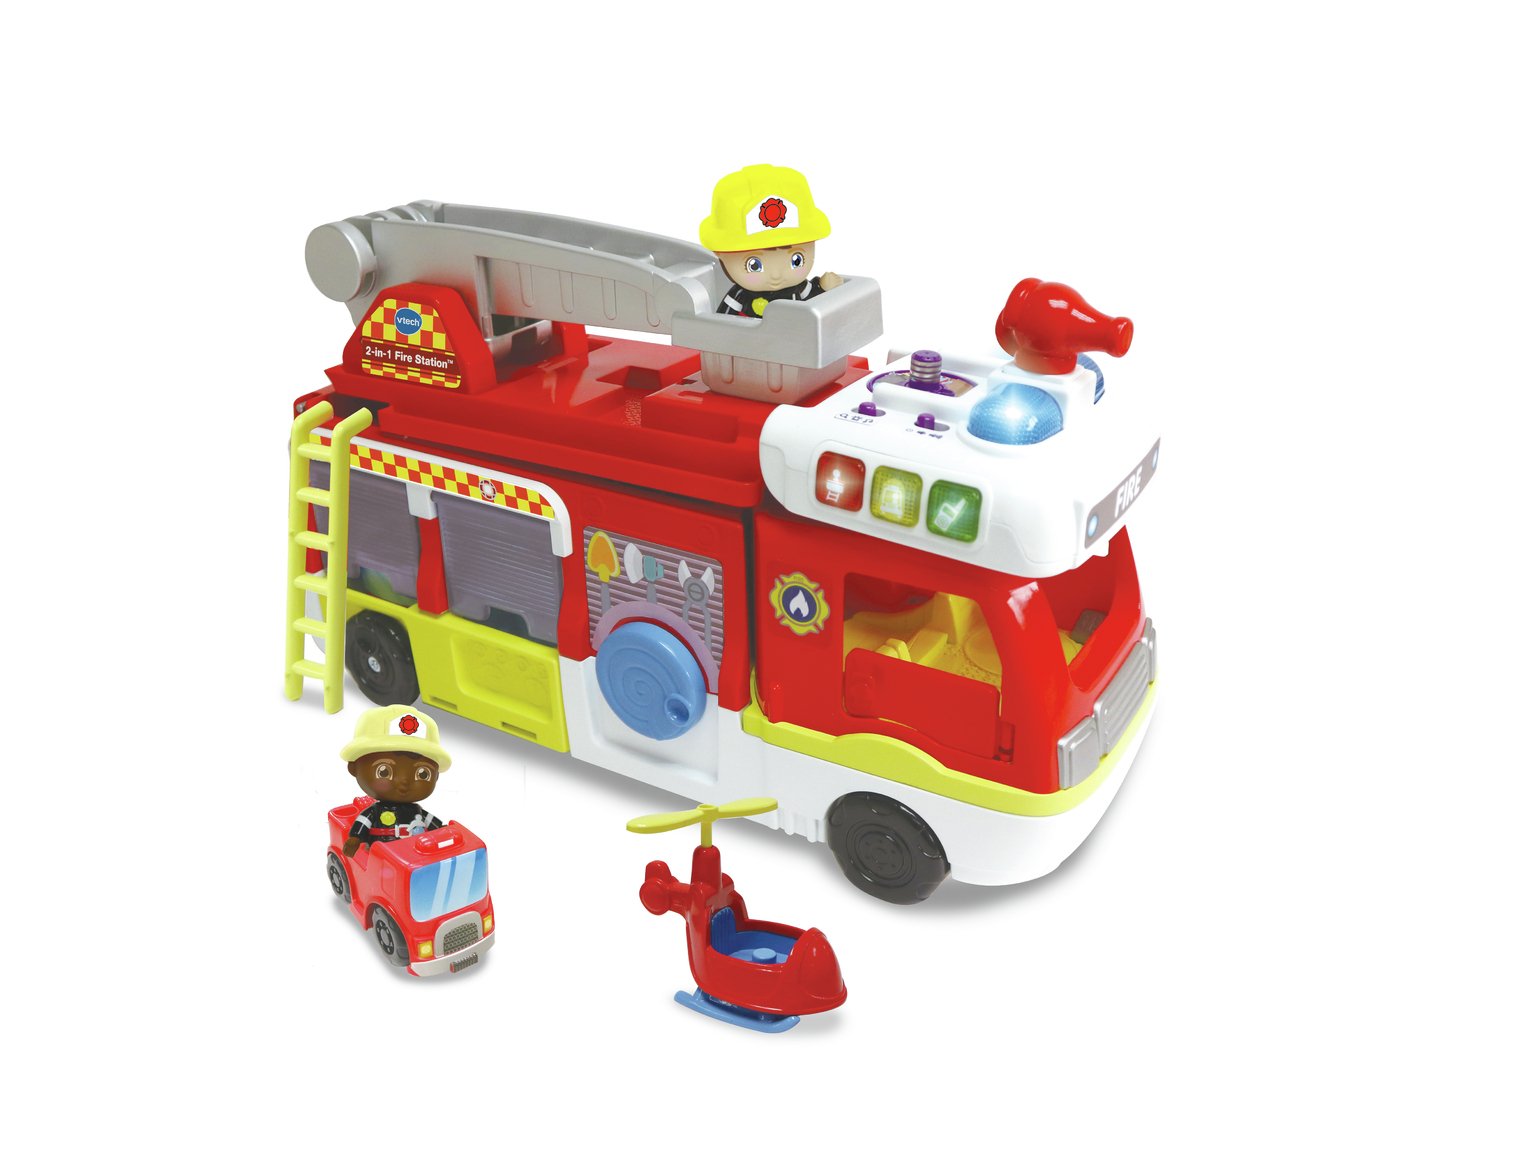 VTech Toot-Toot Friends 2-in-1 Fire Station Playset Review